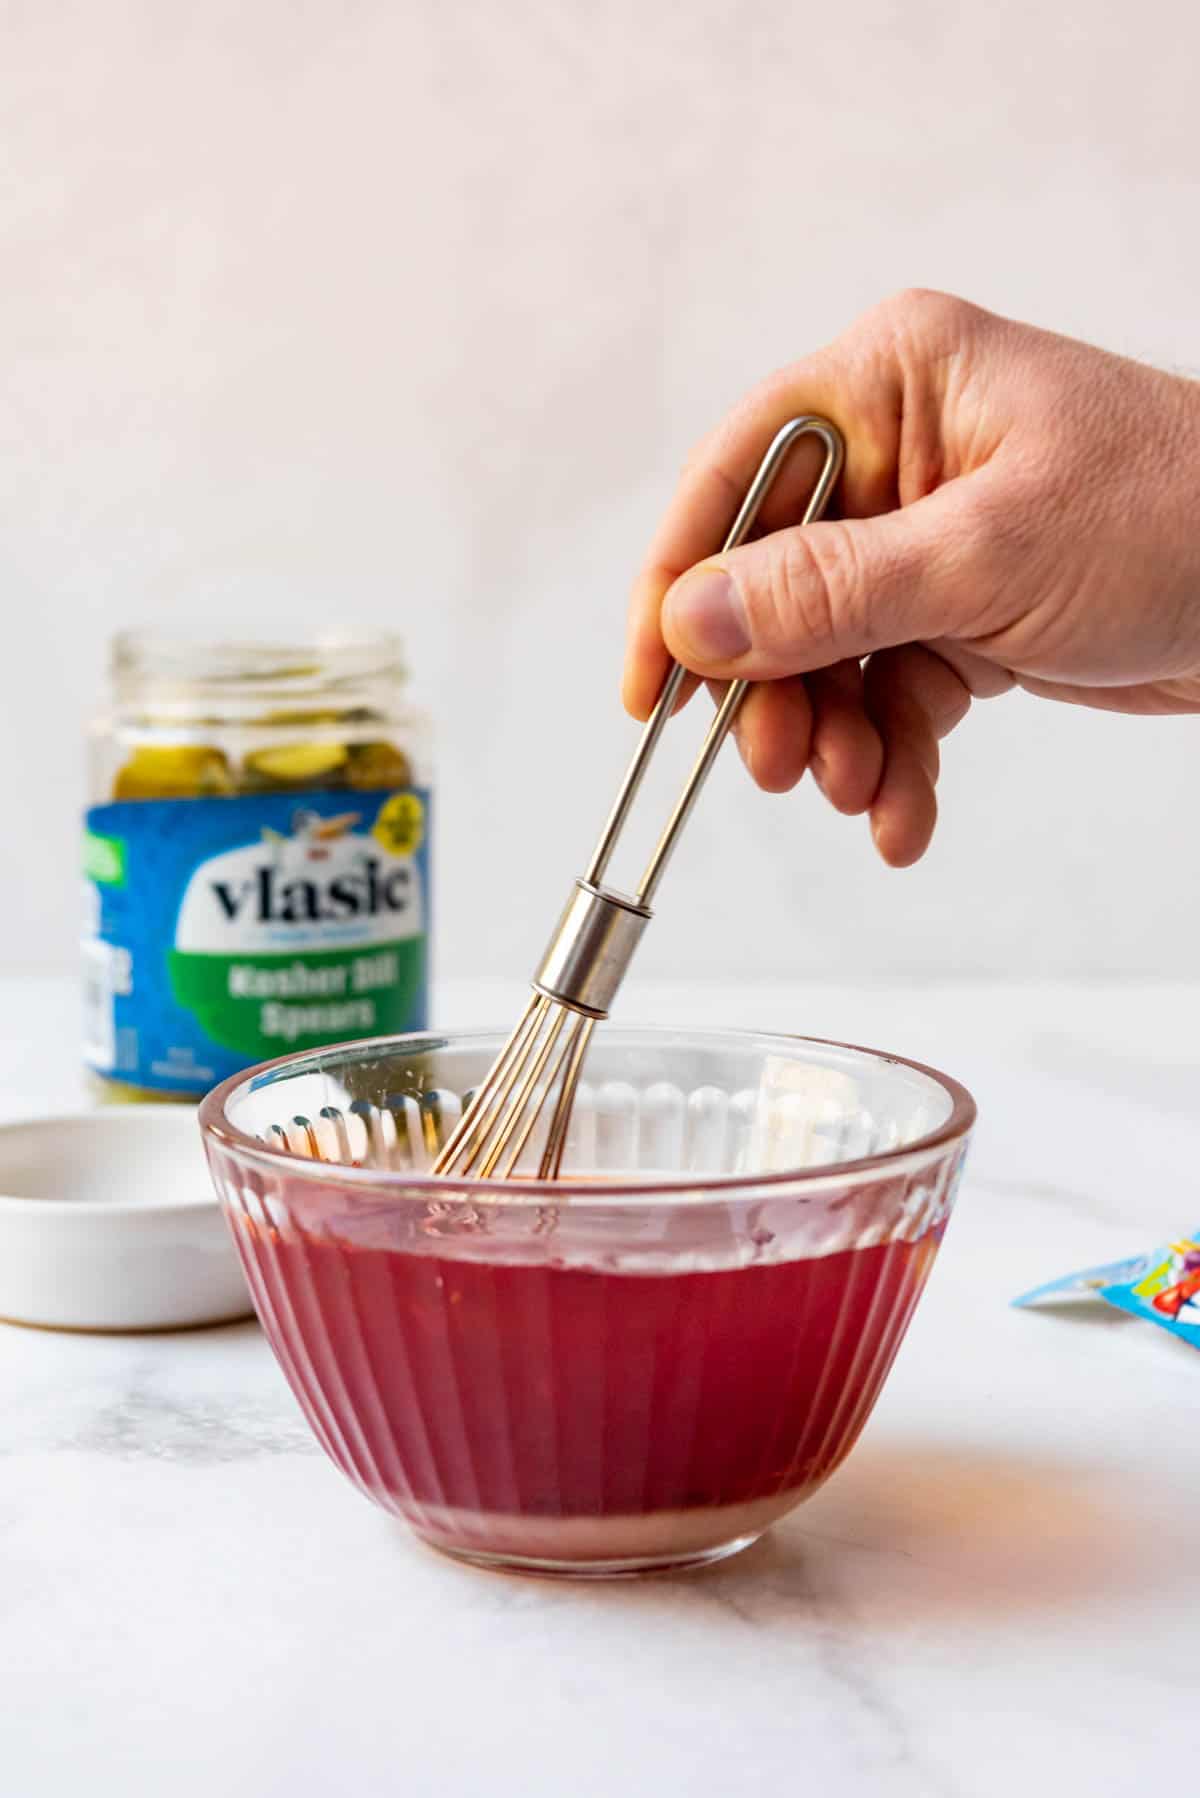 Whisking sugar and kool-aid into a bowl of pickle juice.